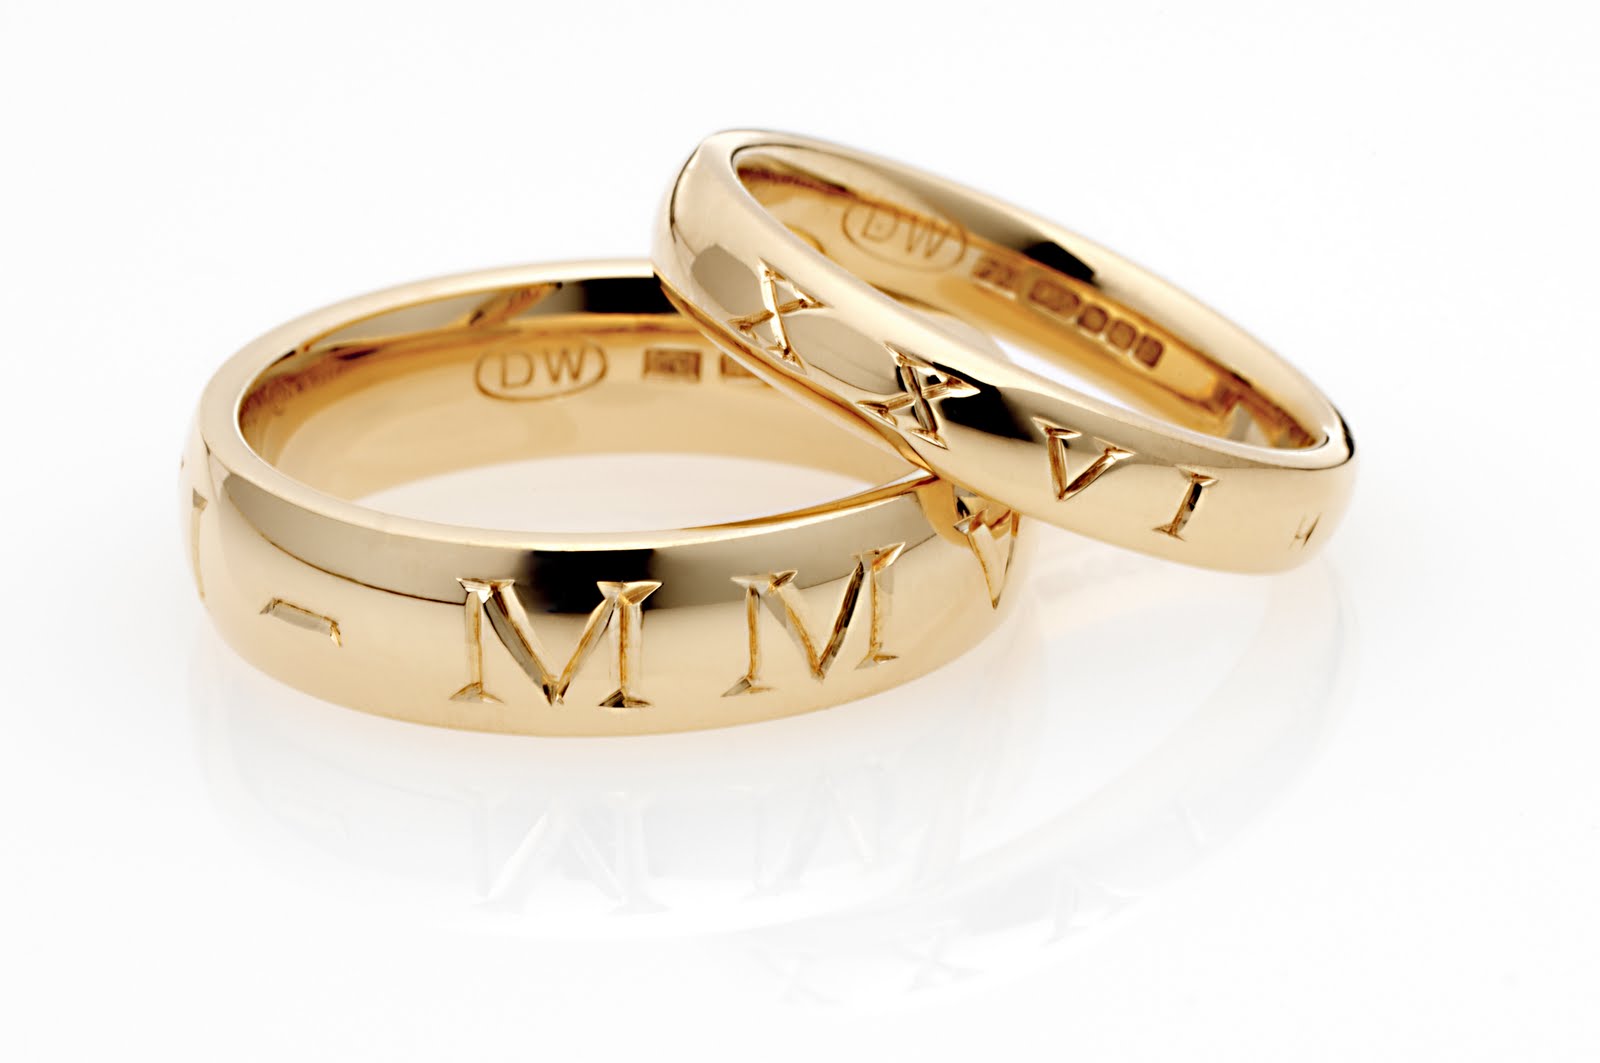 Engraved couples wedding rings